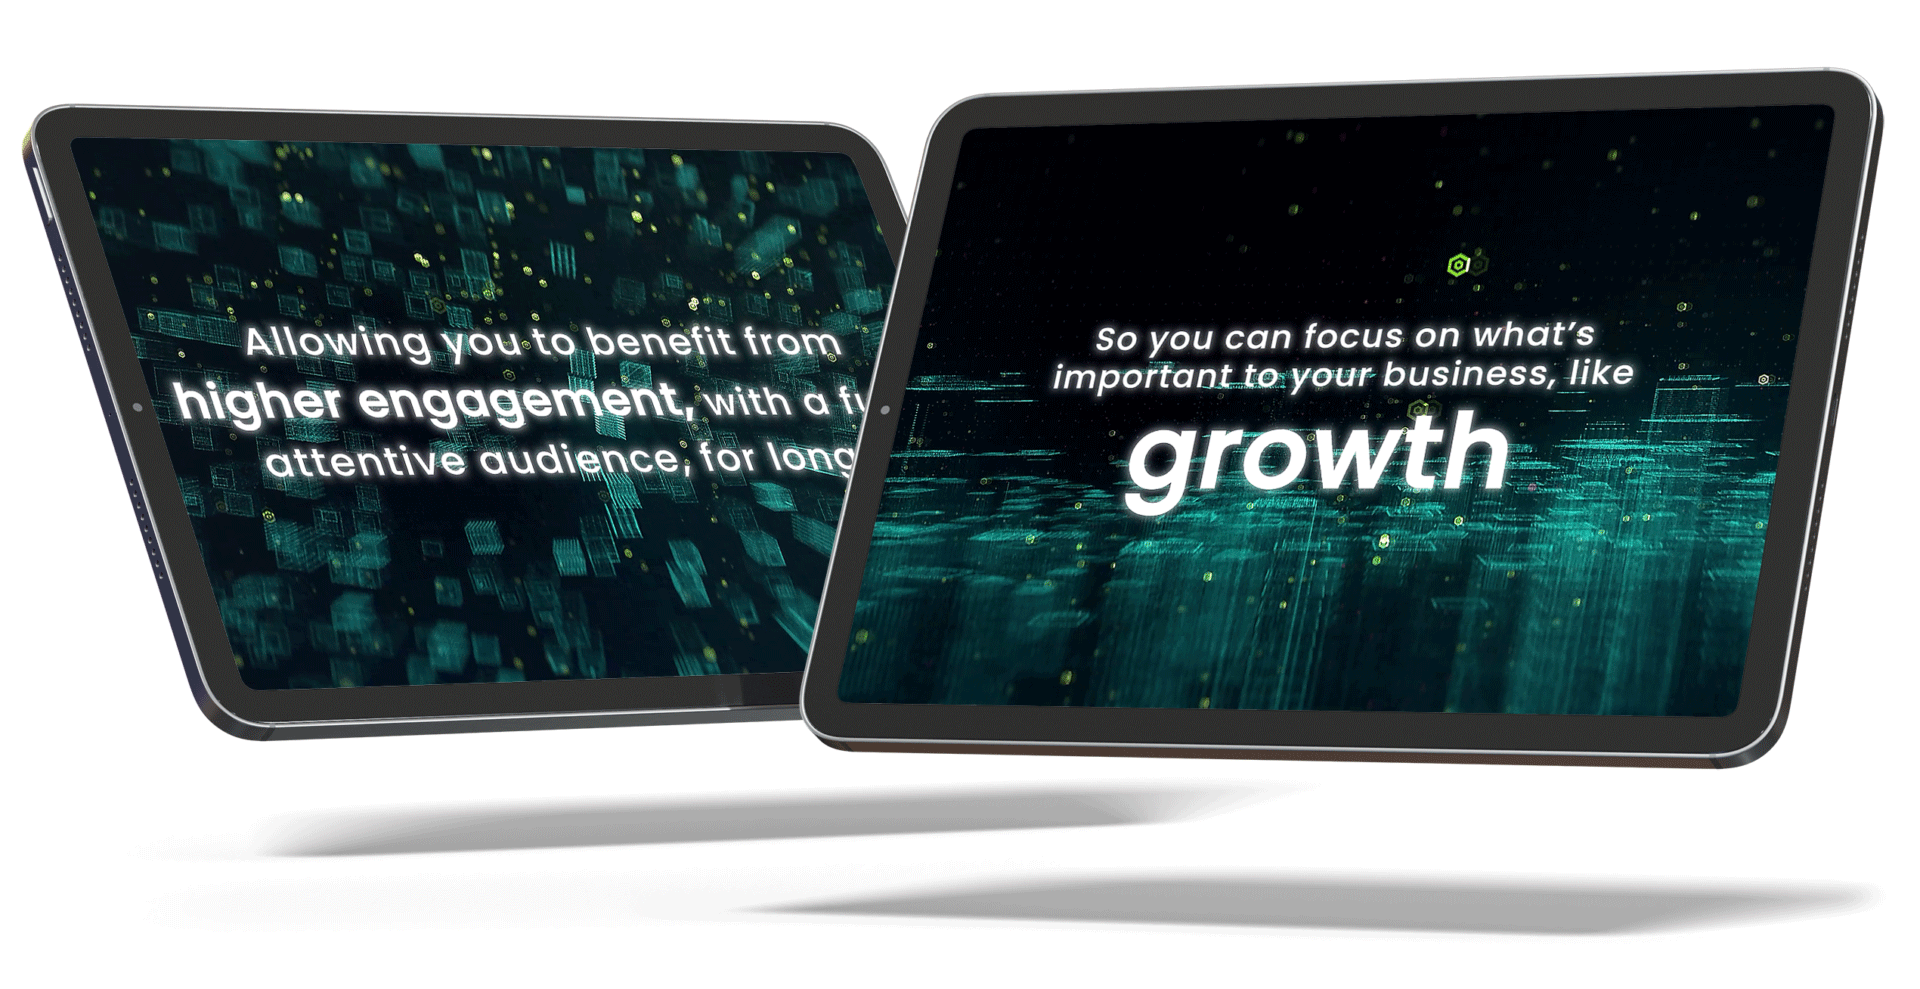 Ipad of growing your business